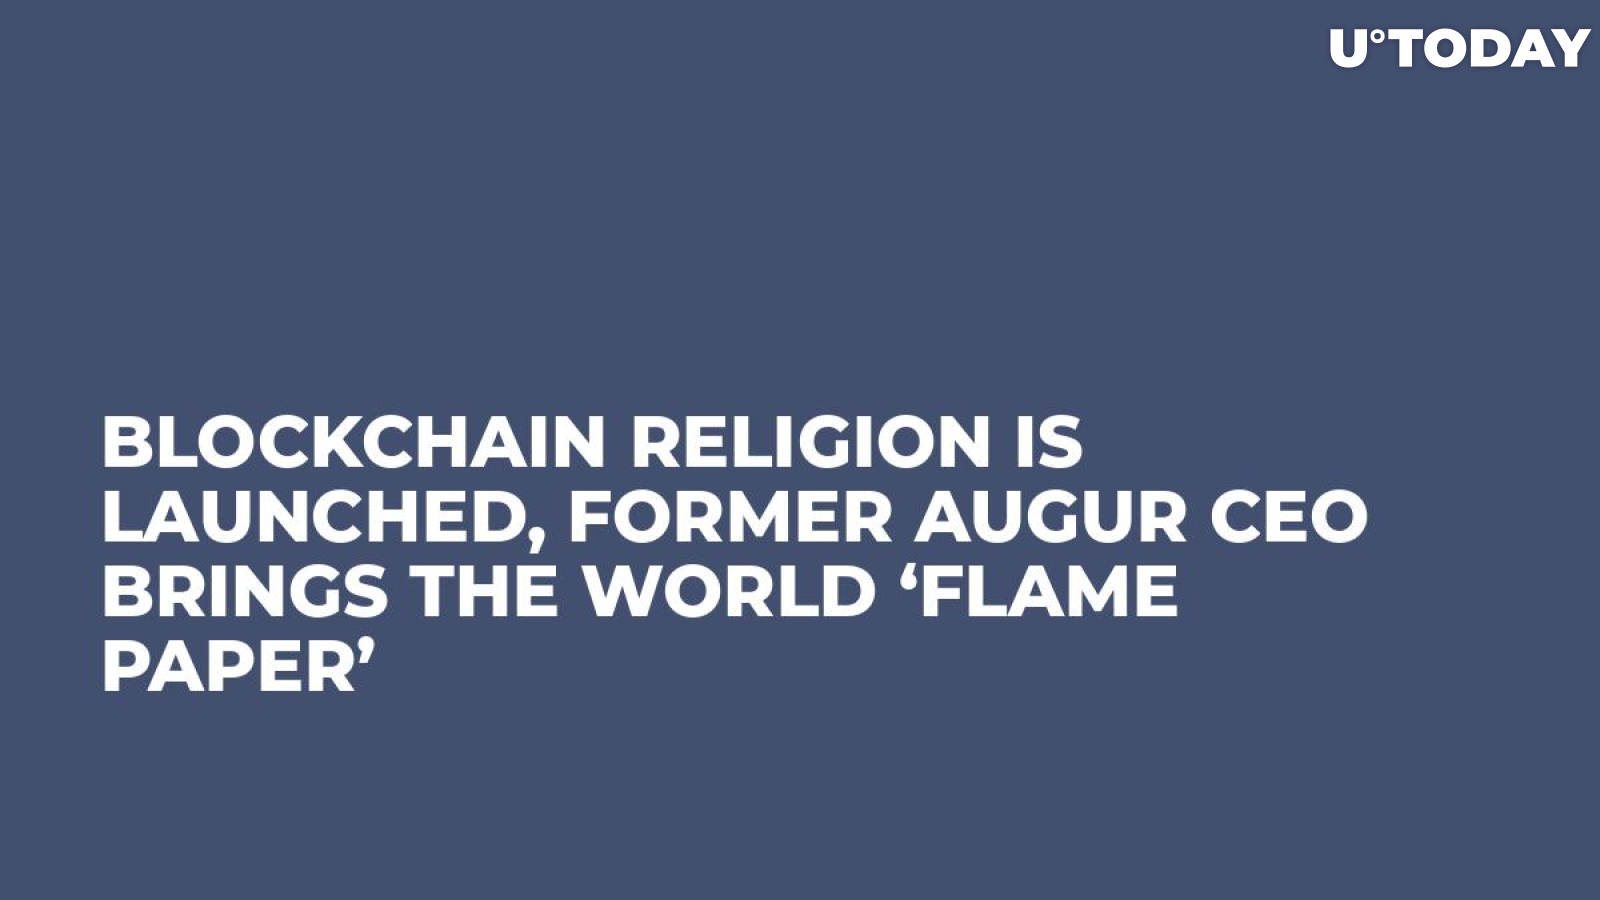 Blockchain Religion Is Launched, Former Augur CEO Brings the World ‘Flame Paper’